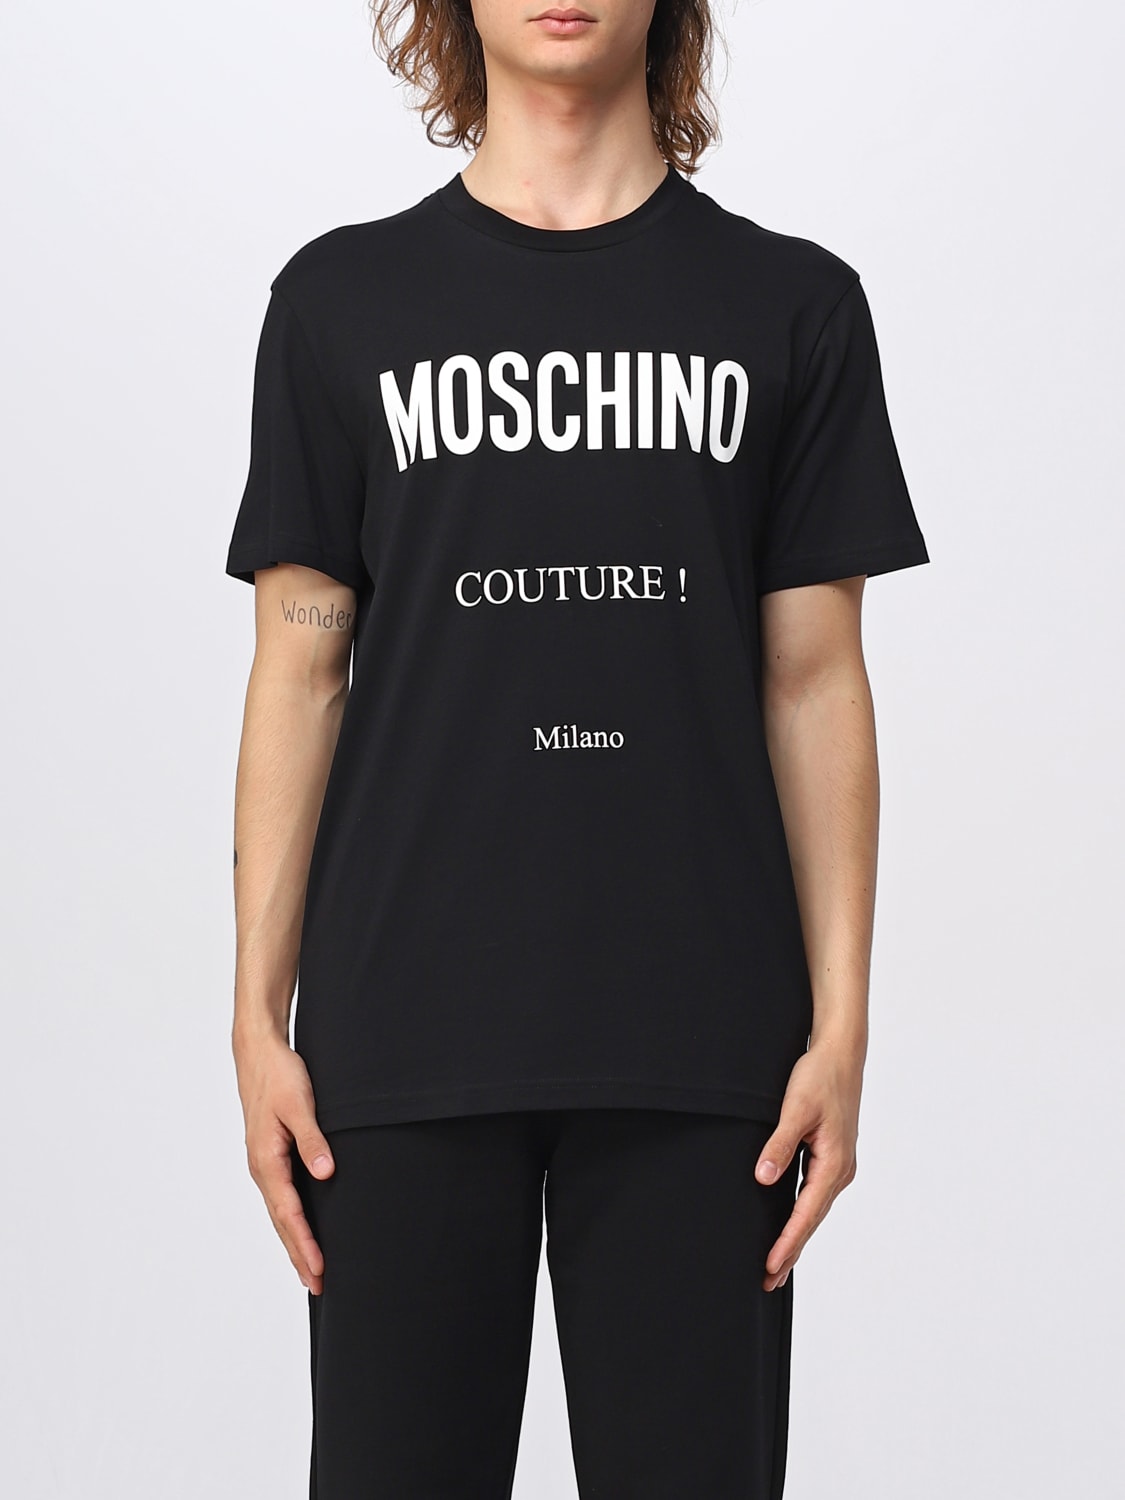 □46/ MOSCHINO COUTURE! モスキーノ ロゴ Tシャツ - Tシャツ ...